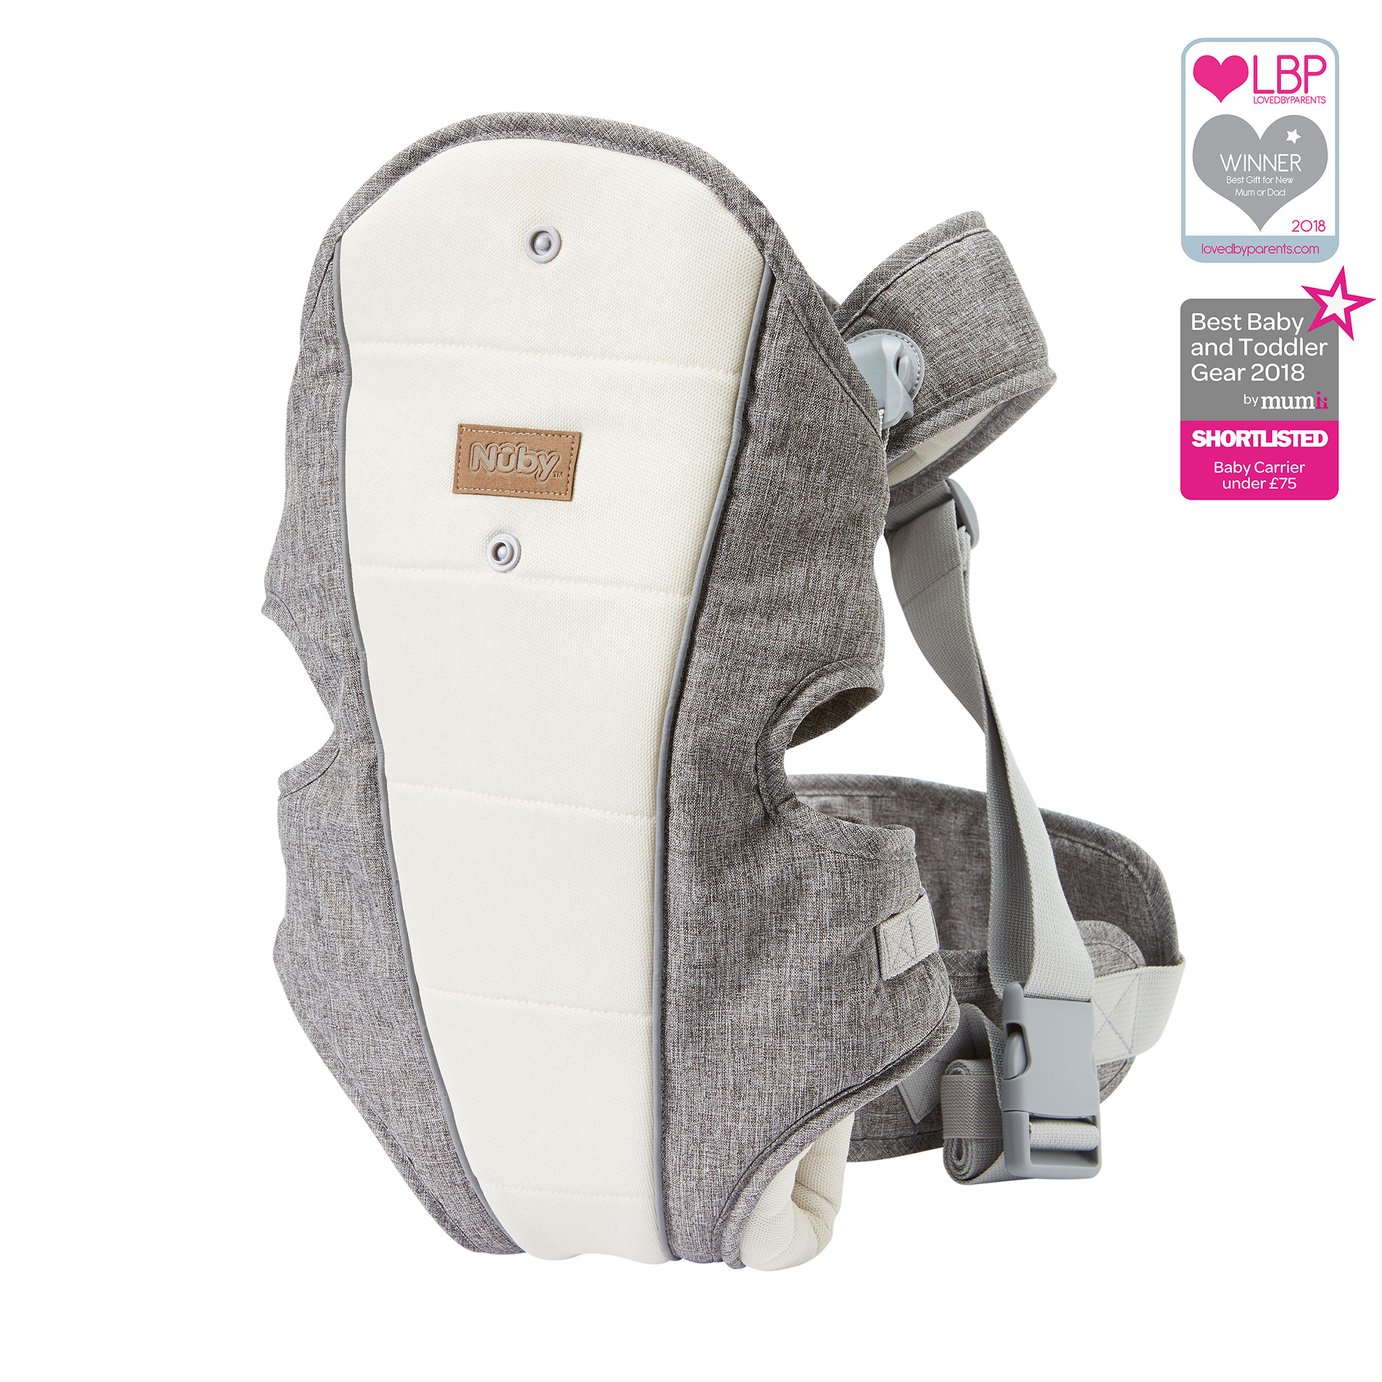 Nuby 3-in-1 Newborn Baby Carrier Review